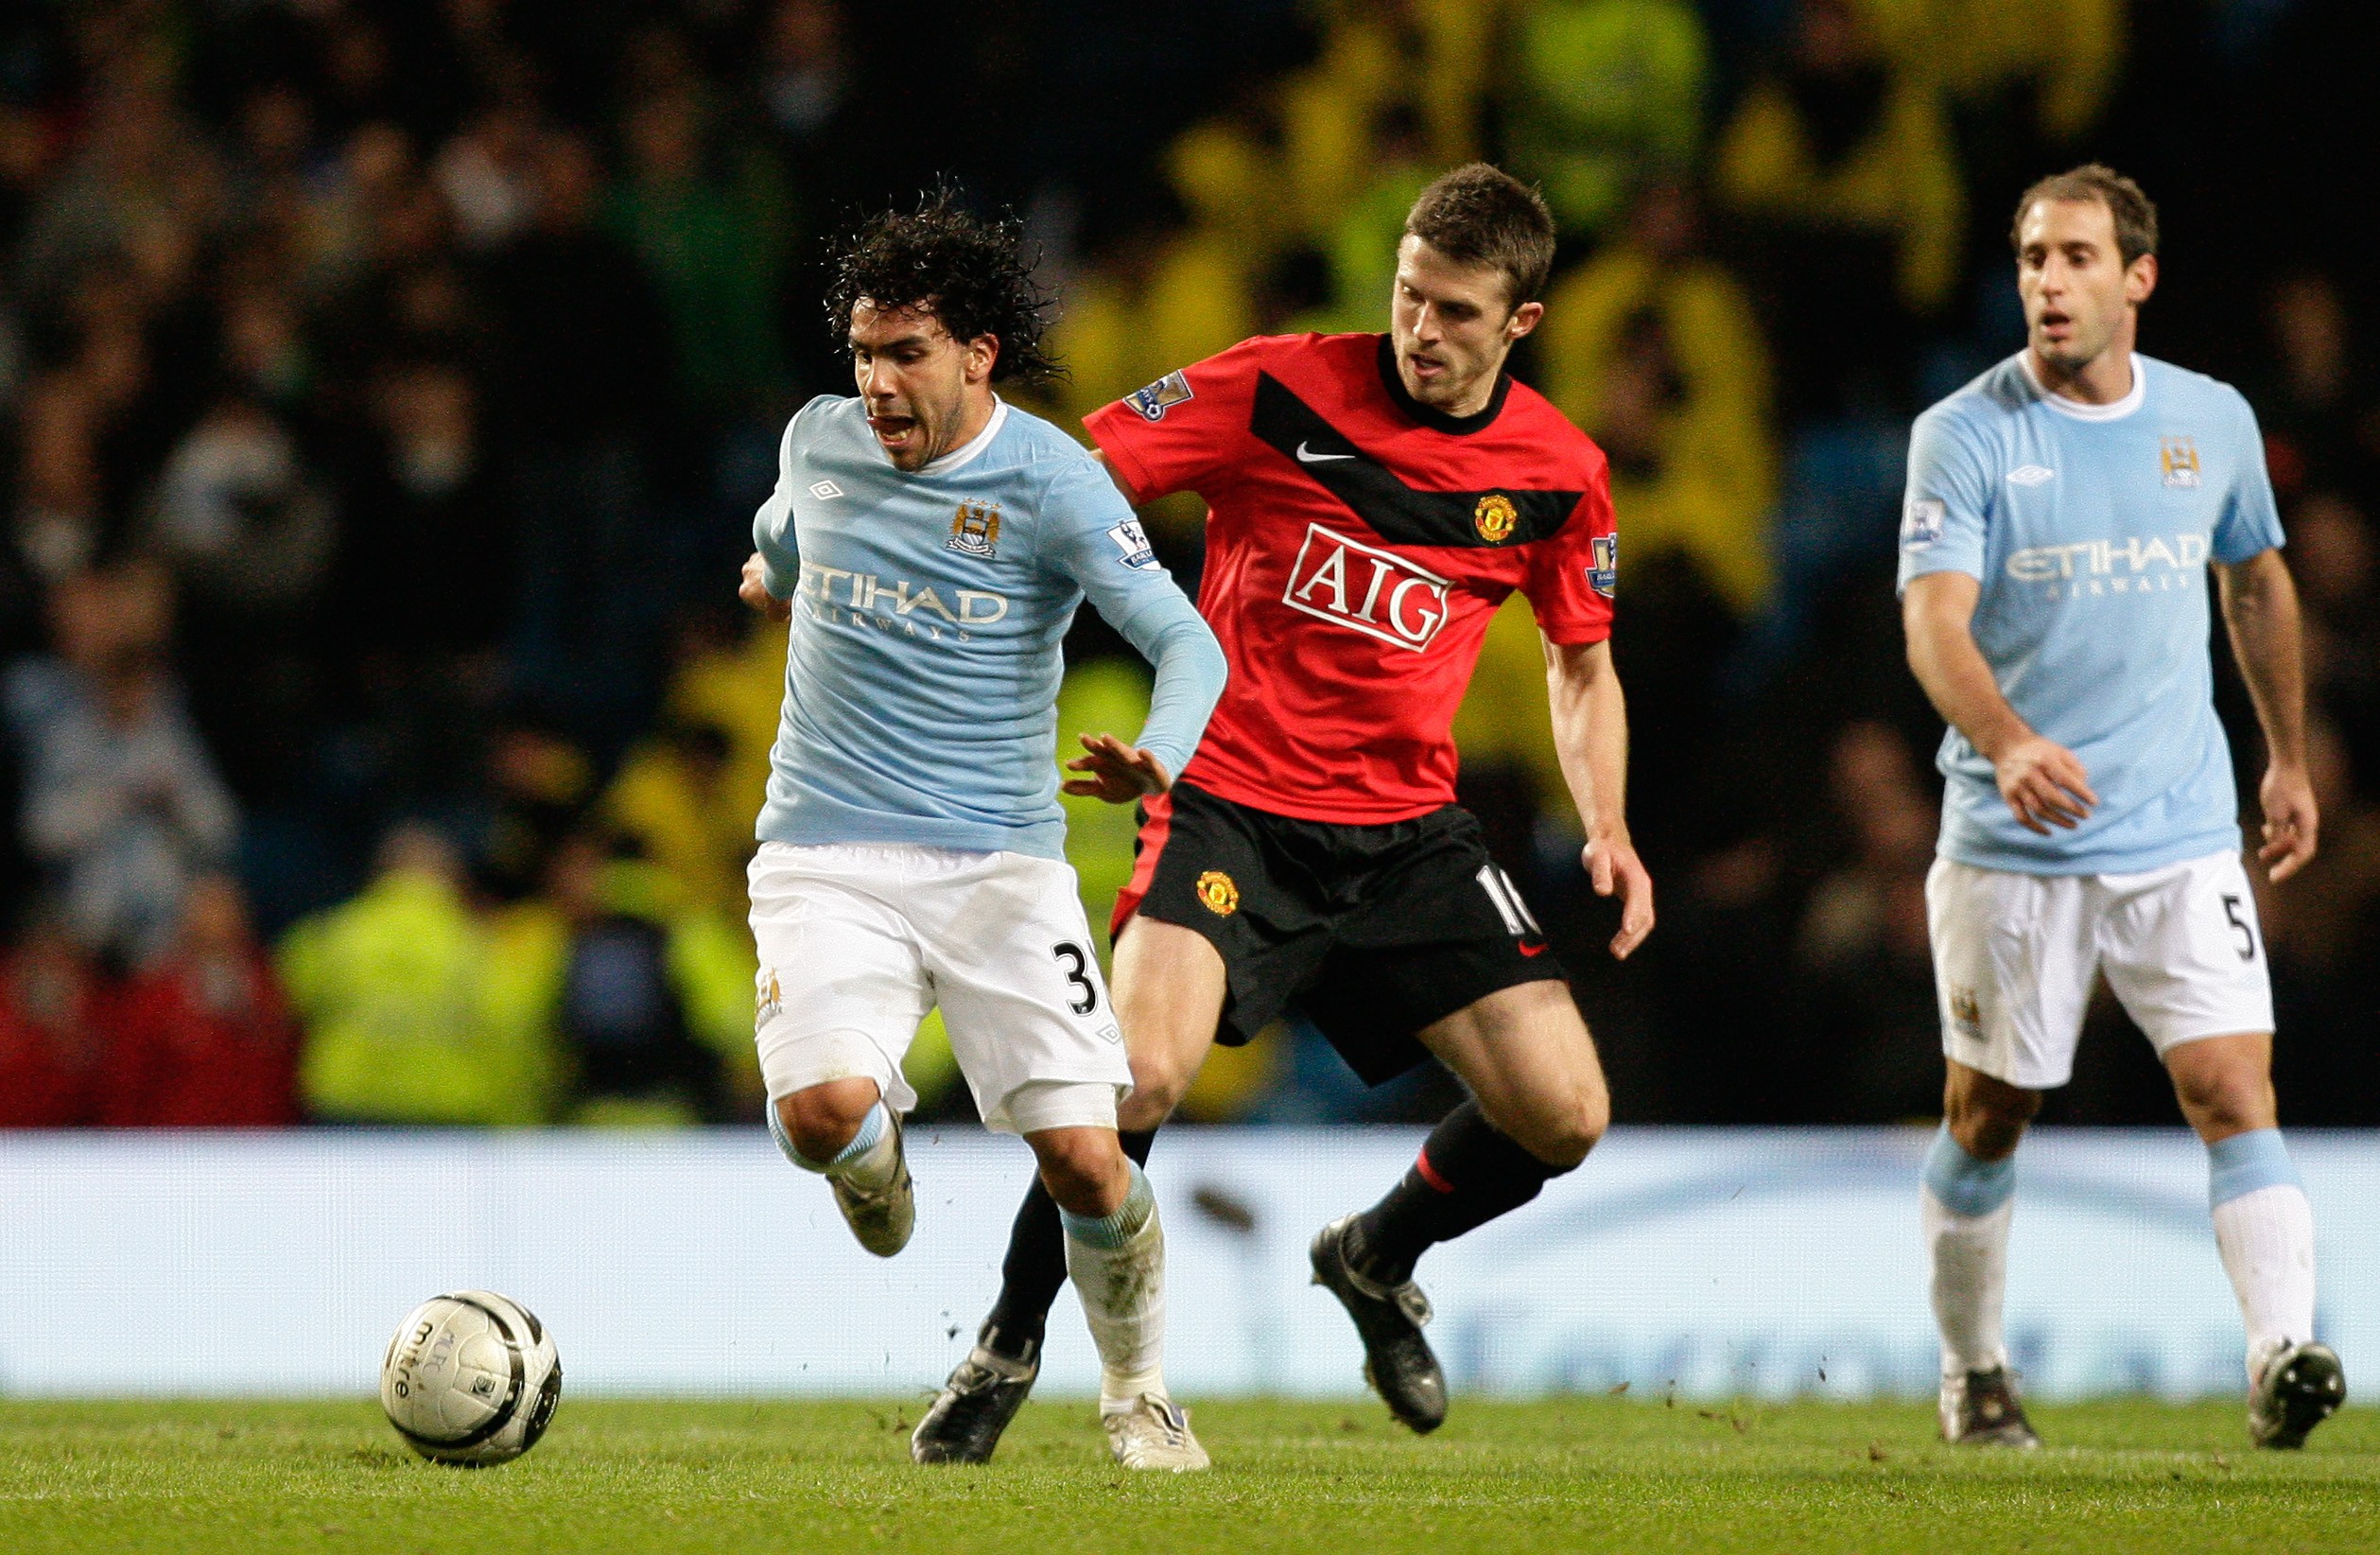 United, Carlos Tevez, Carling Cup, City, Manchester